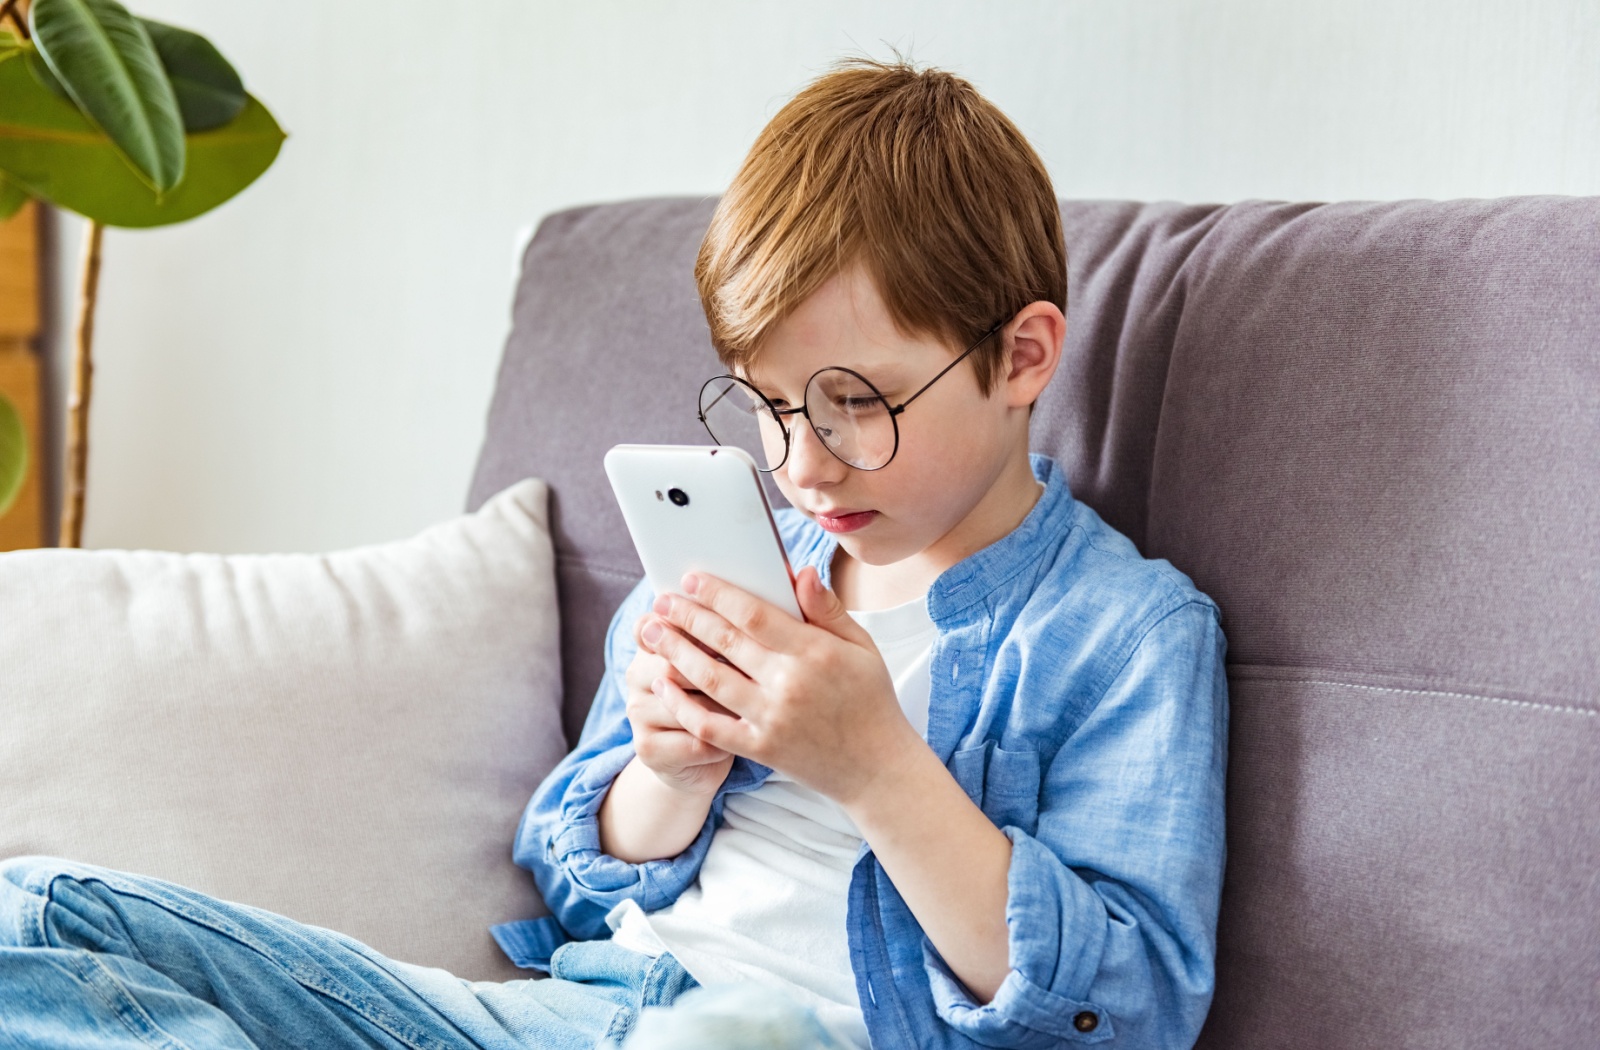 A child with large round glasses sitting on a couch and holding a smartphone very close to his face